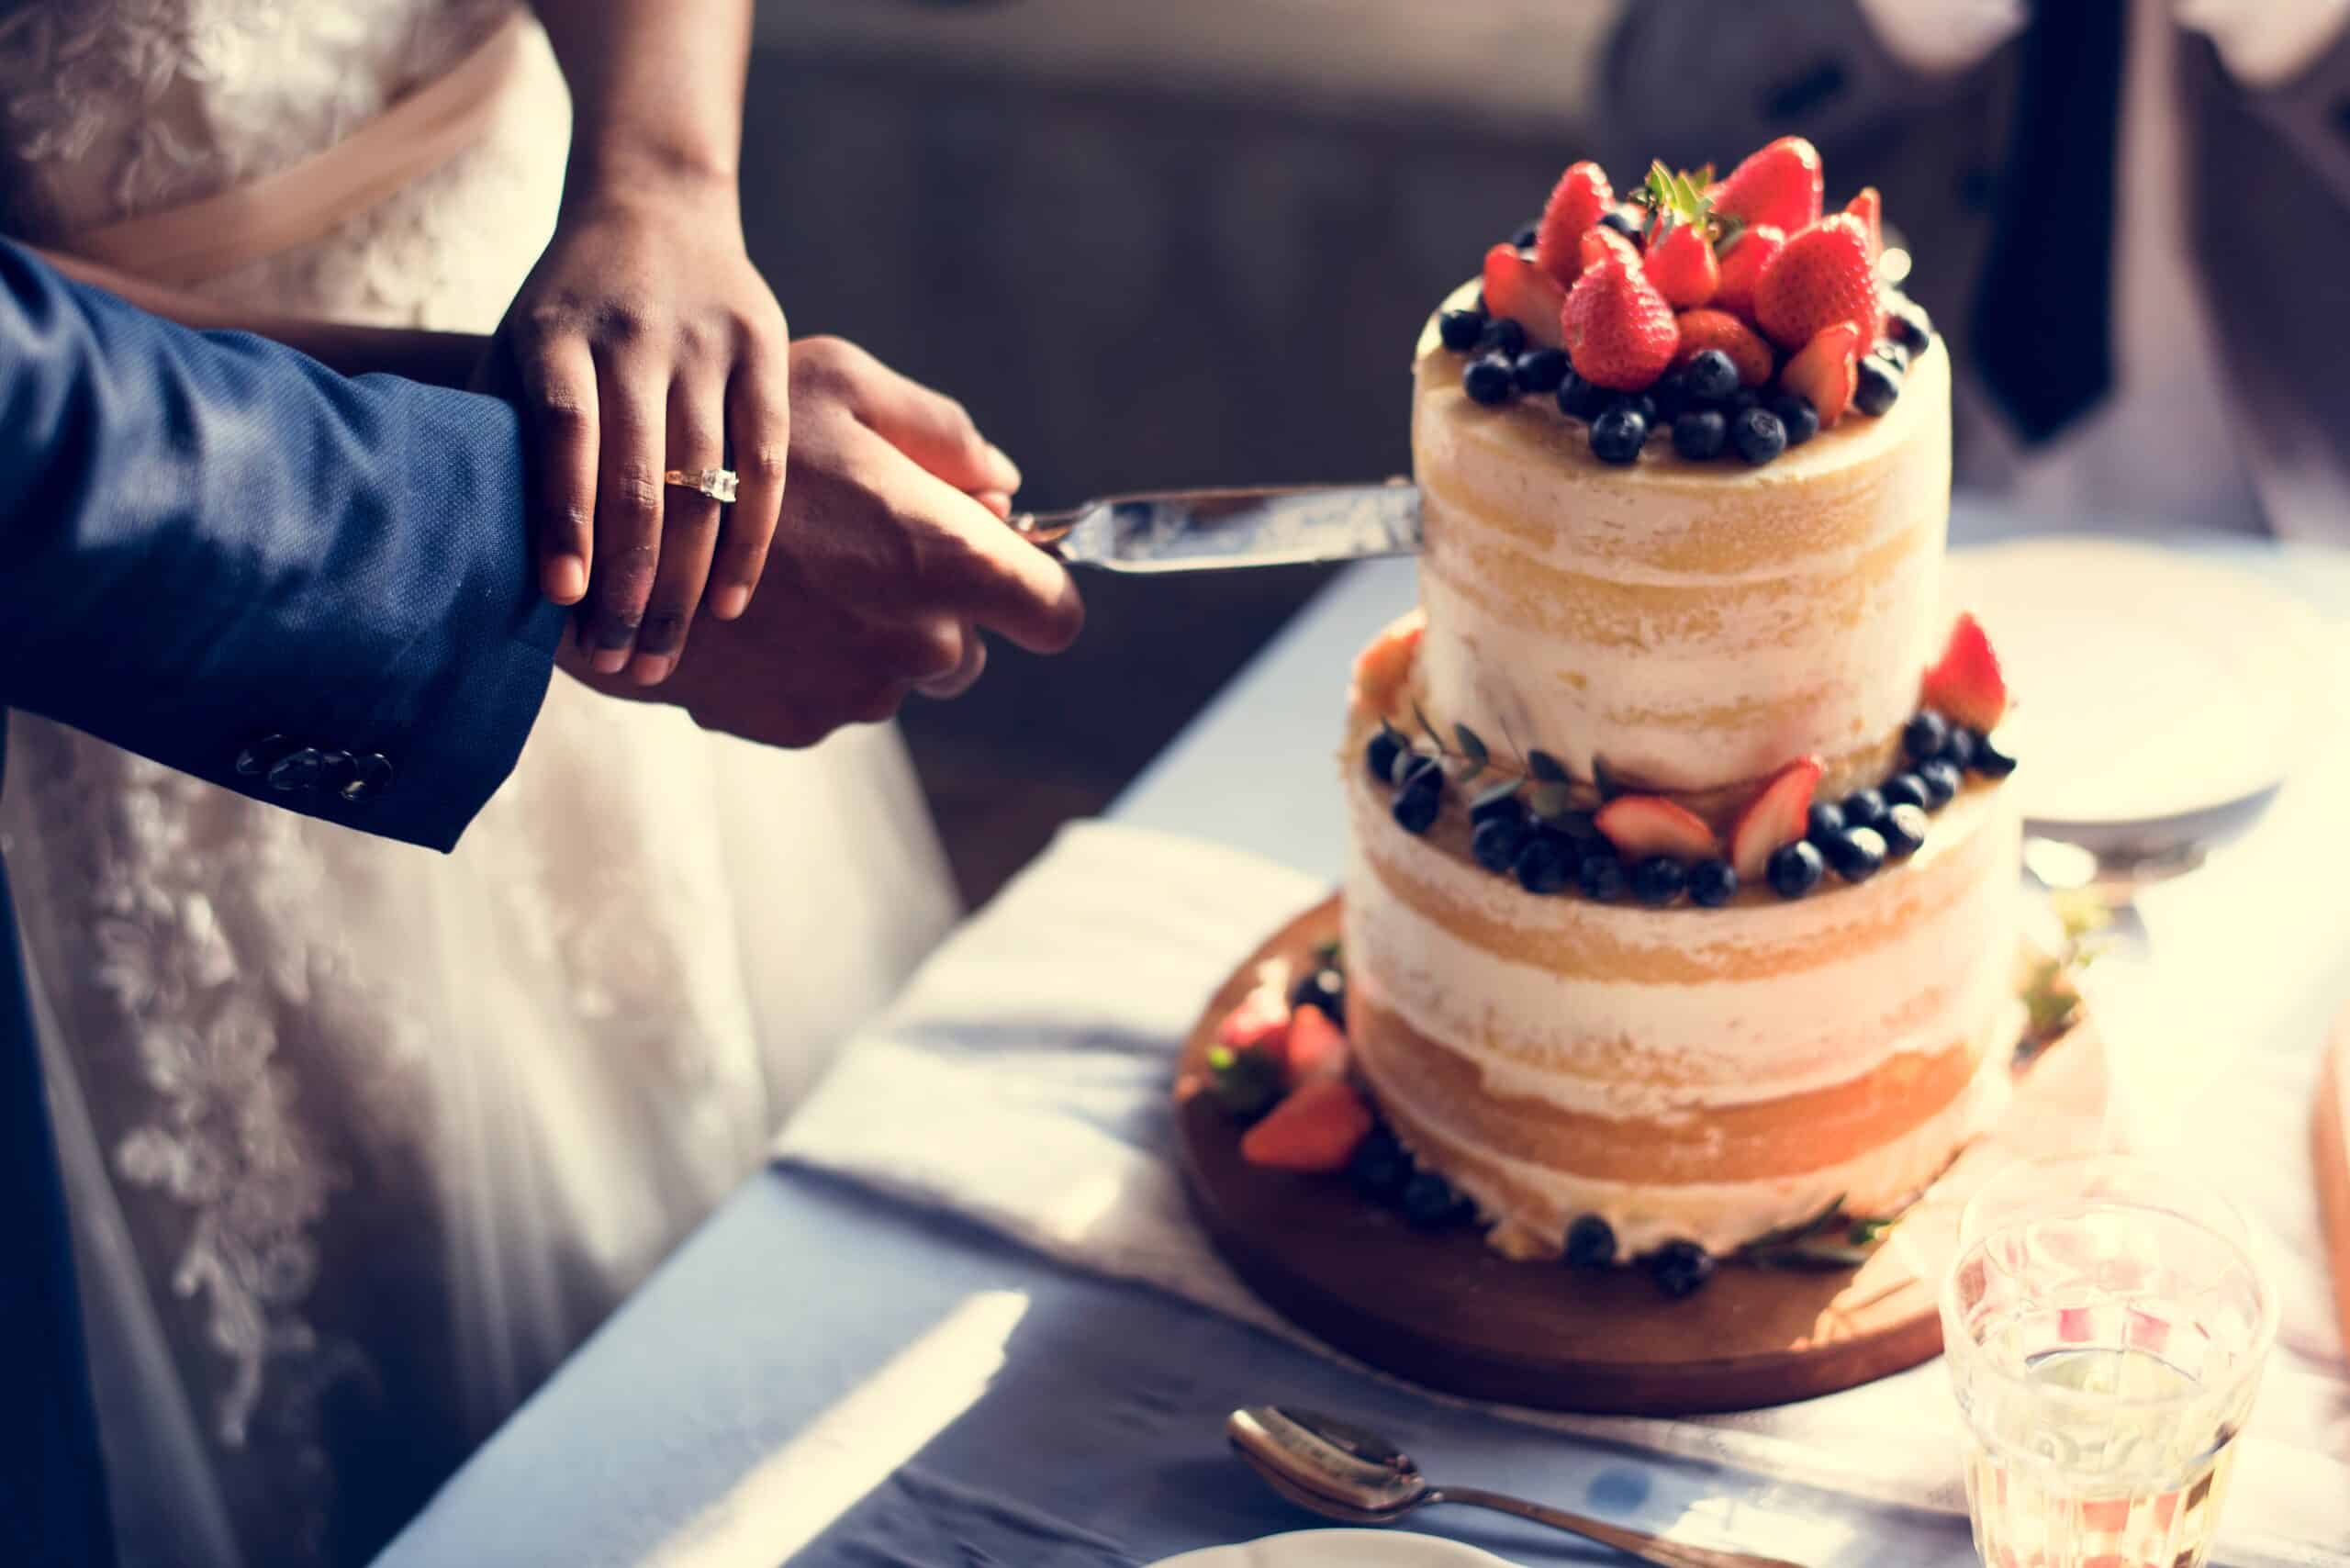 The UK’s most popular wedding traditions